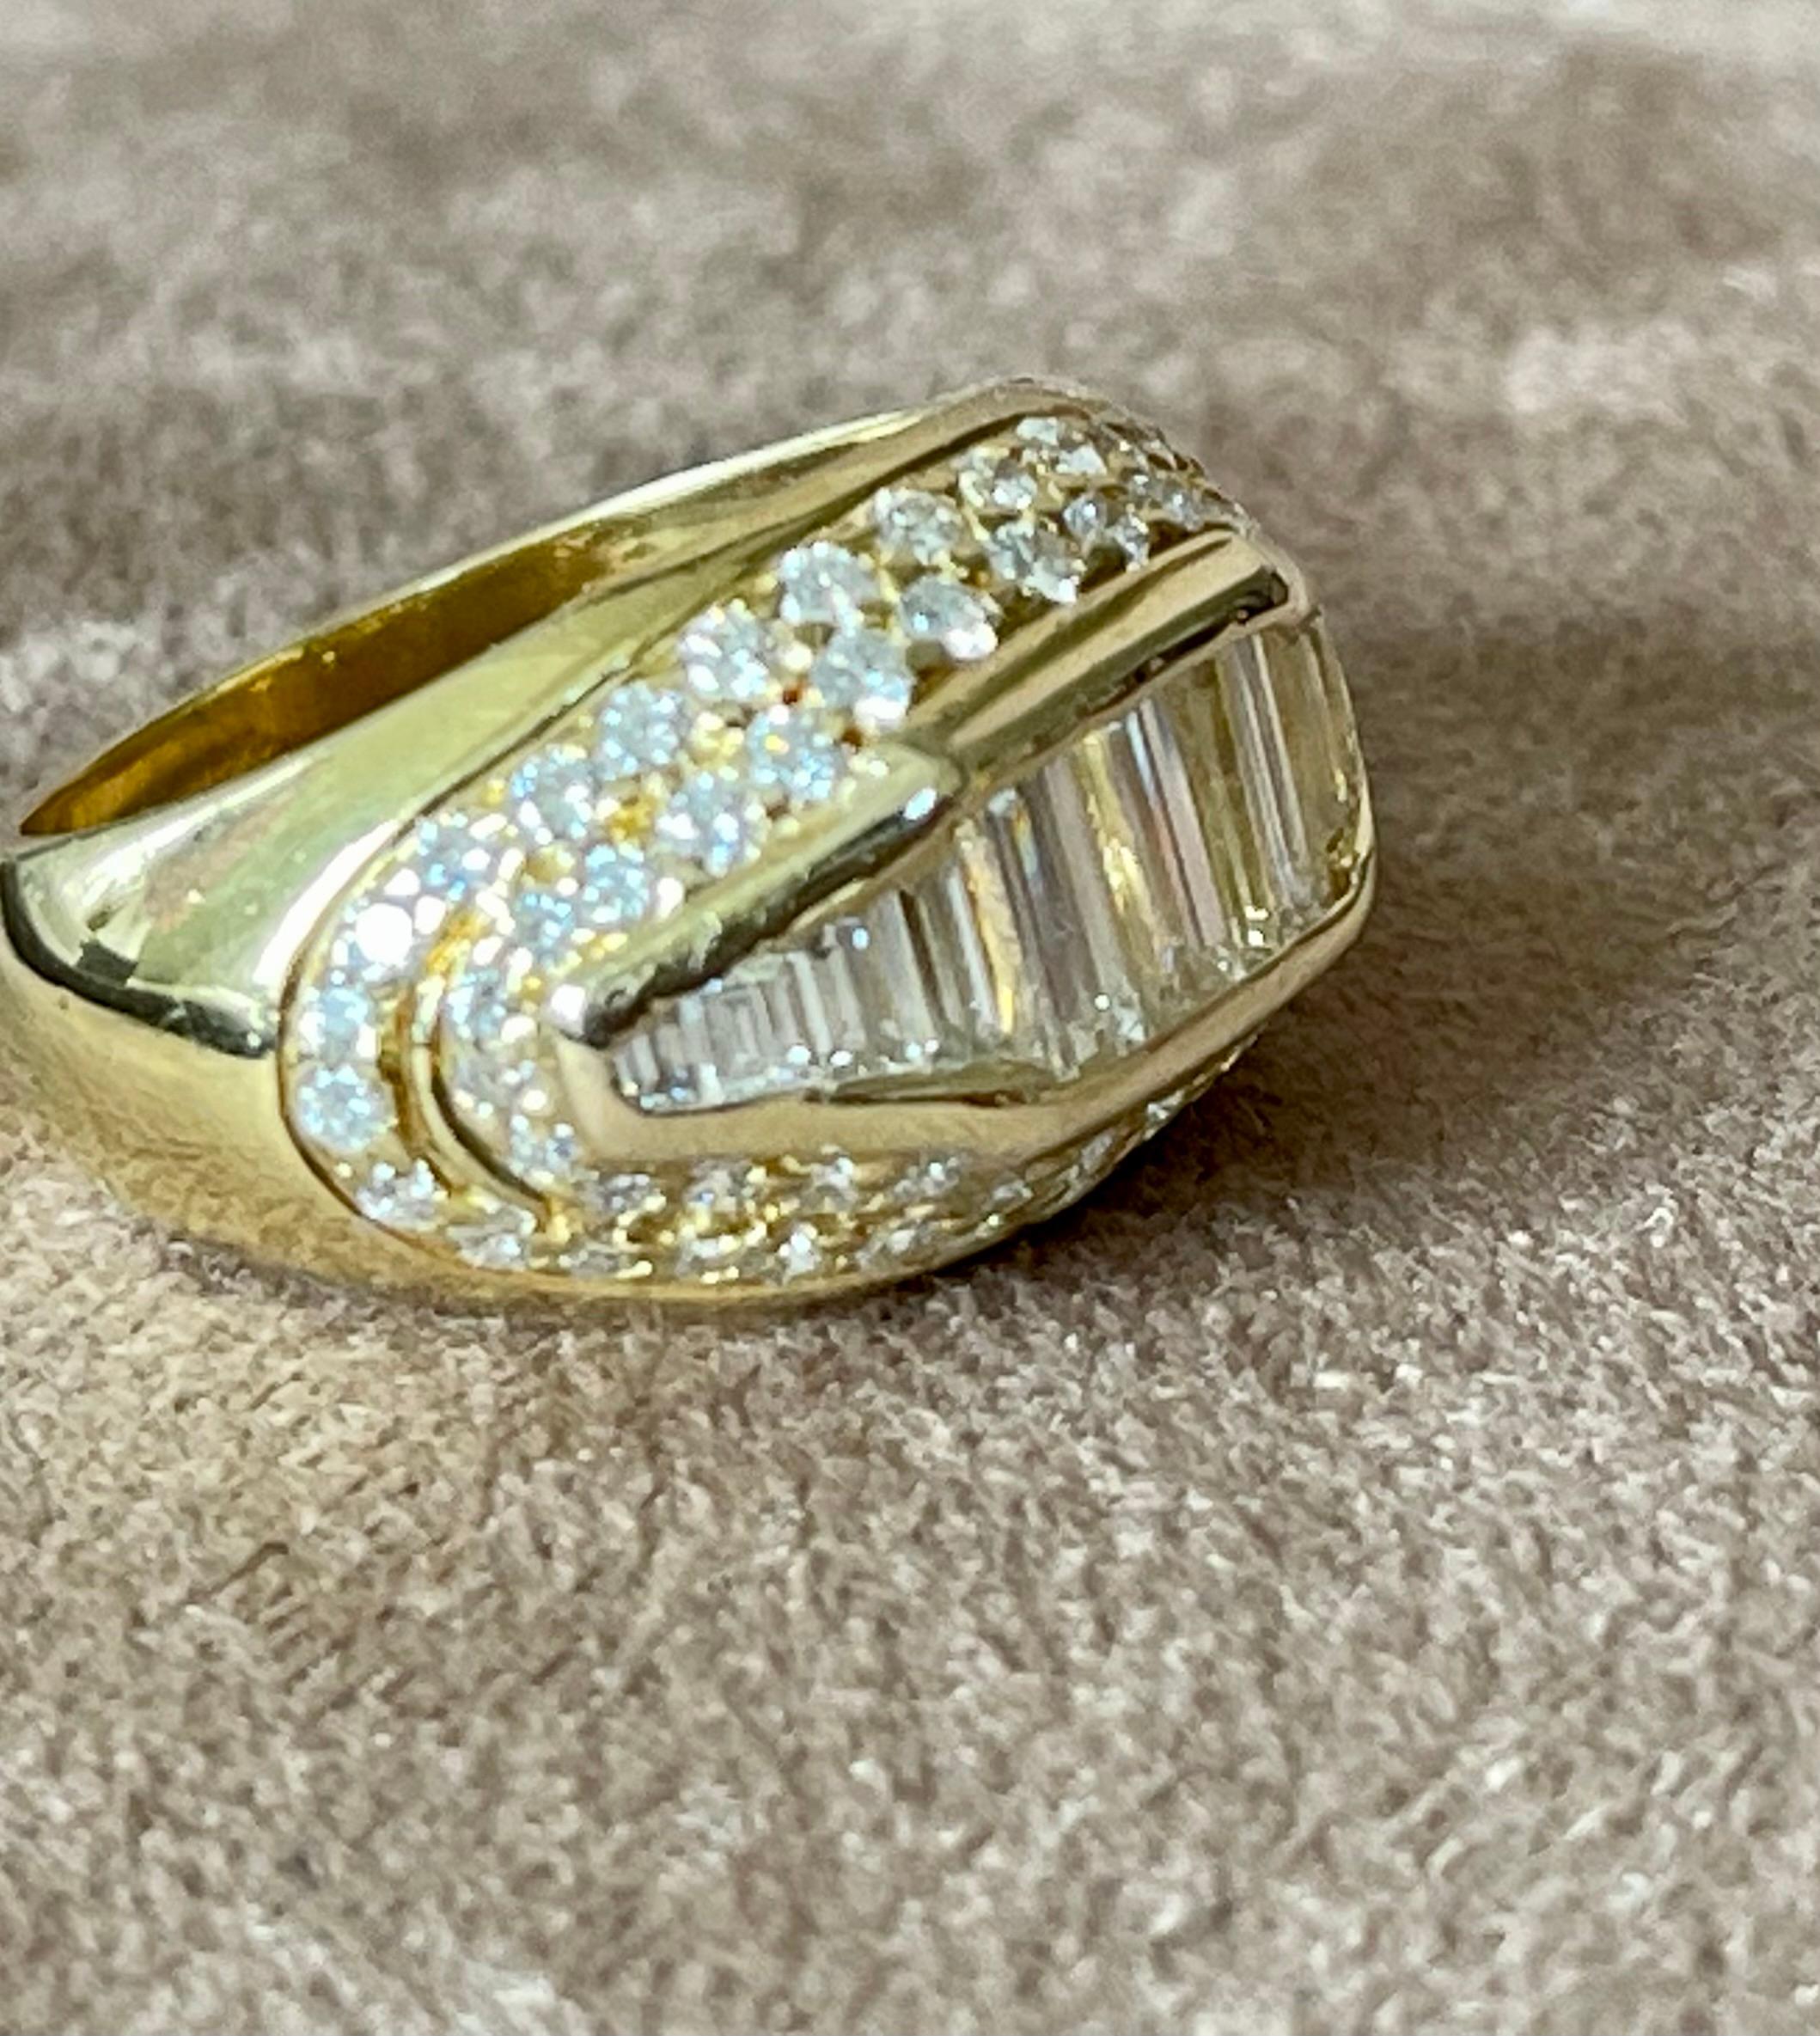 Beautiful diamond  band fashioned in 18 K yellow Gold. The band features 11 baguette shape diamonds weighing approximately 1.20 carat total weight, and round brilliant cut diamonds weighing approximately 0.90 ct. The diamonds are graded H-I color